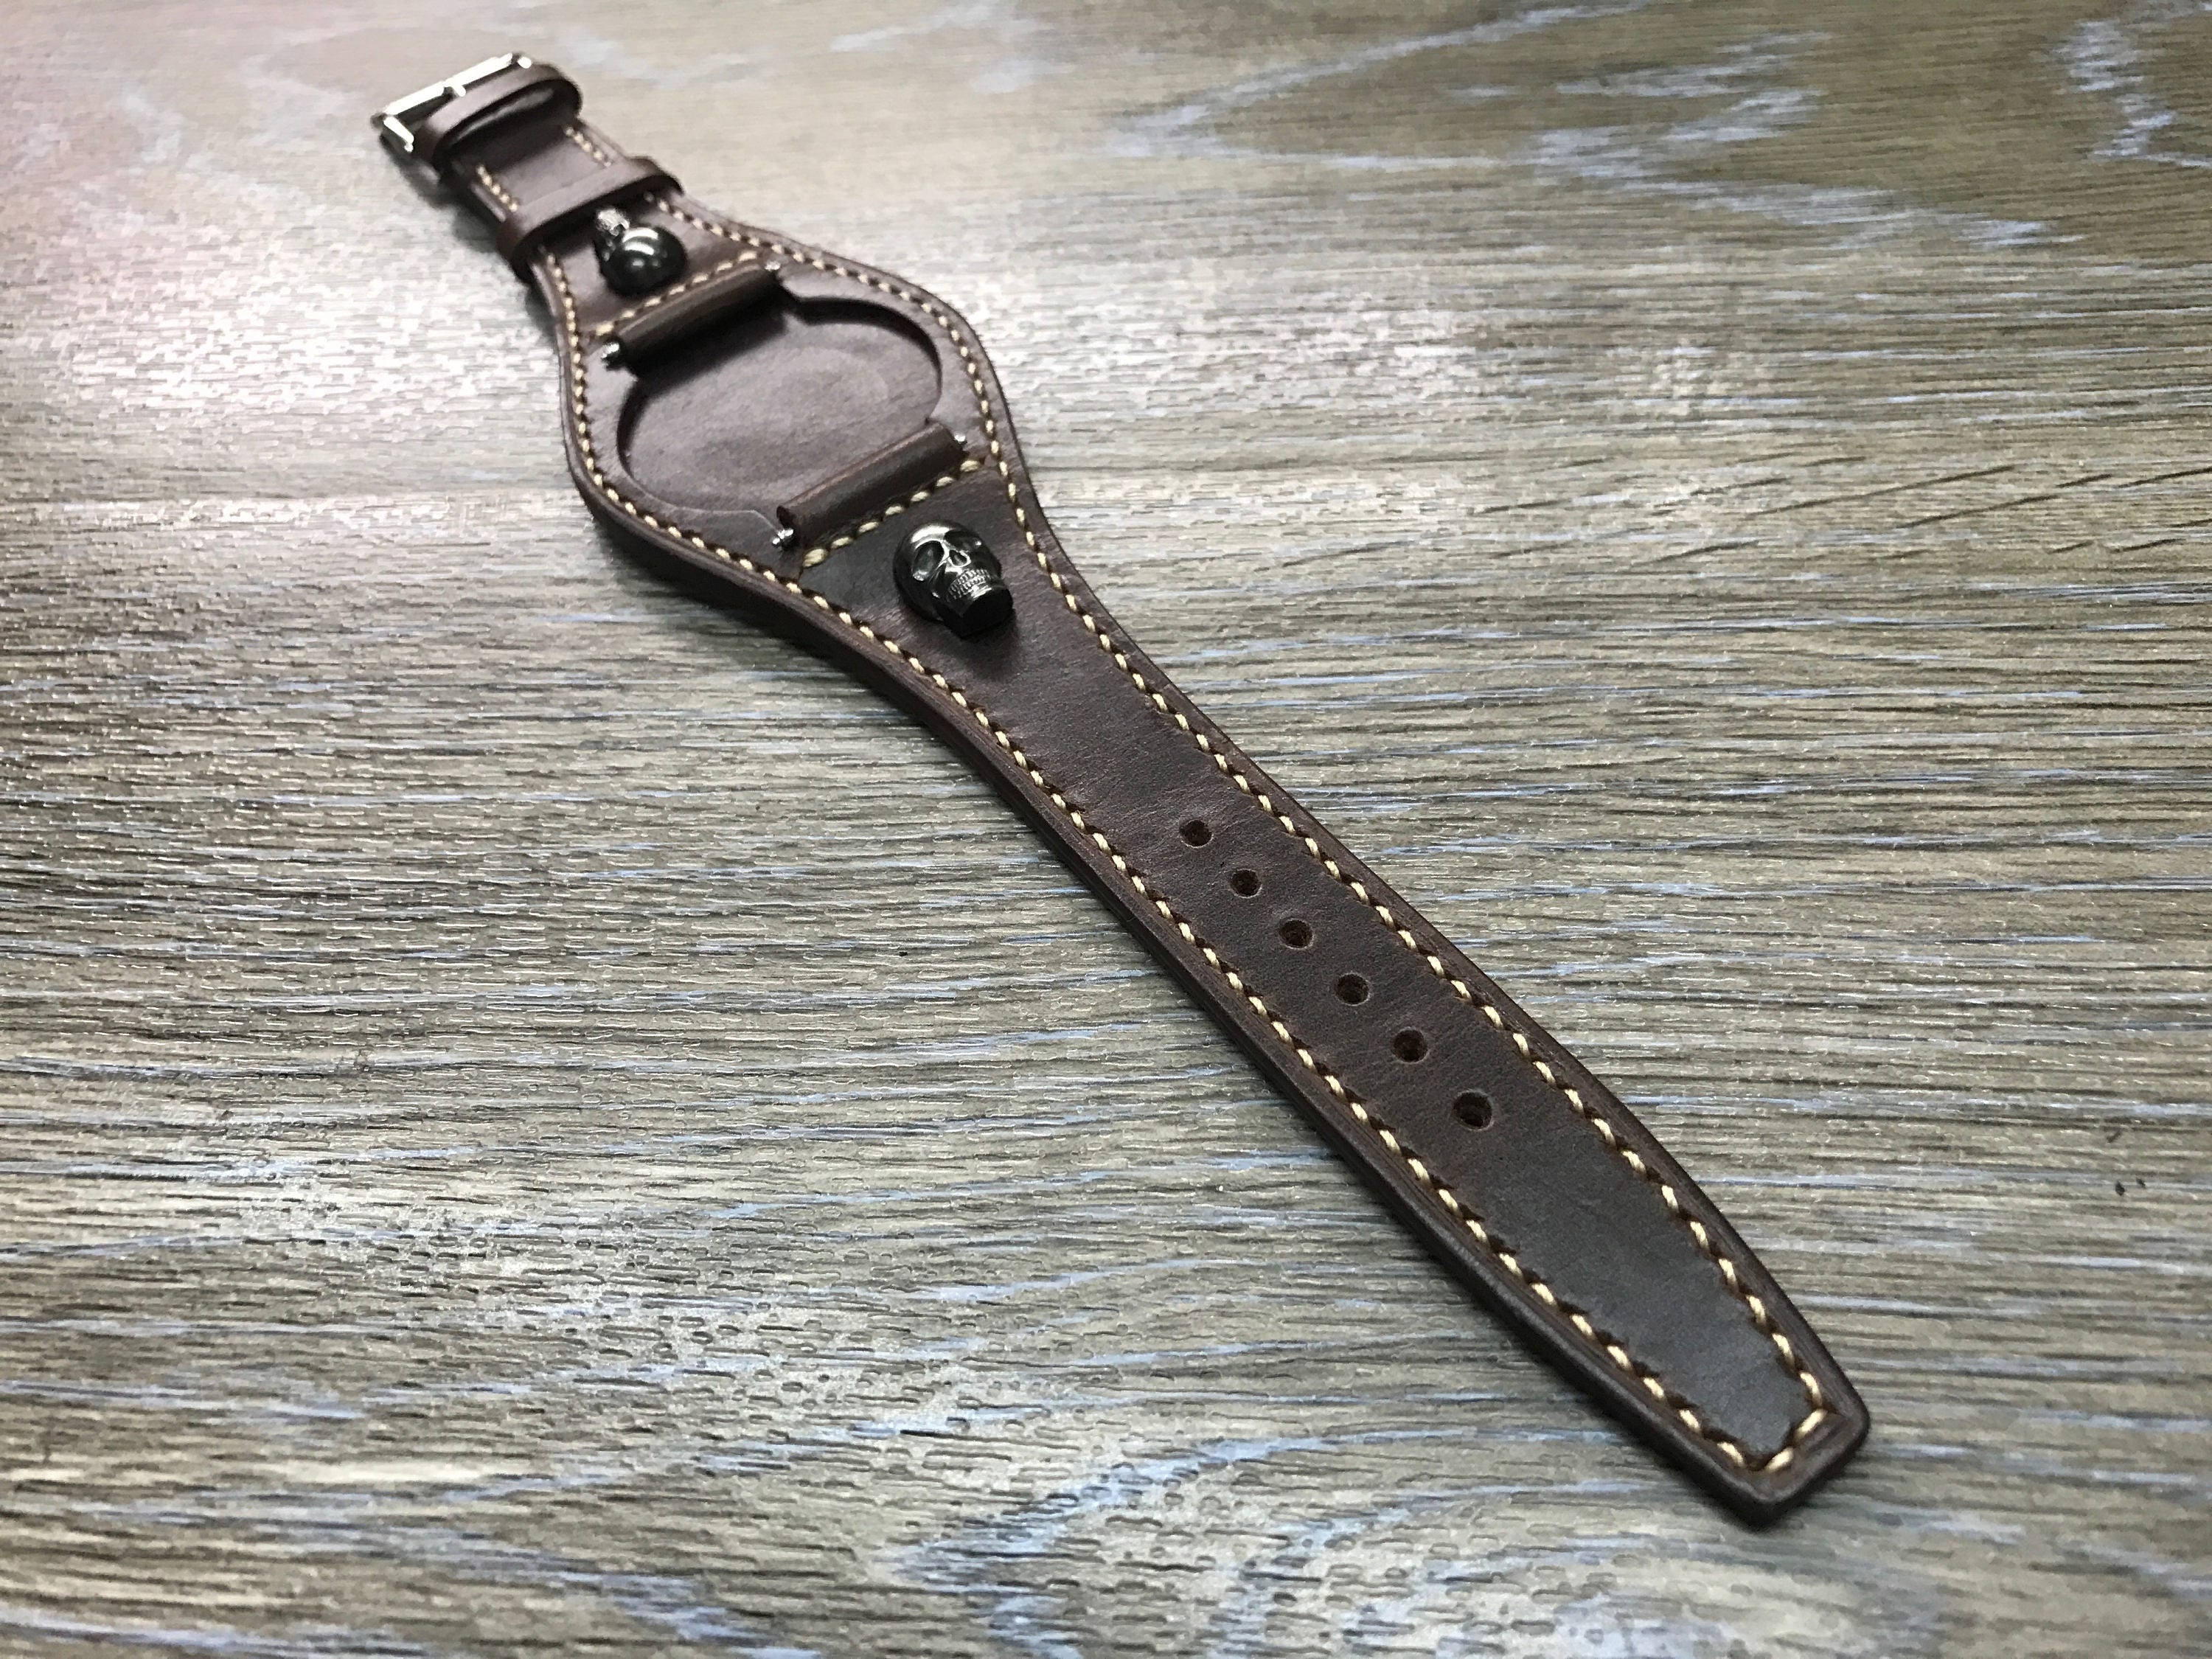 Full Bund Strap Leather Watch Band Brown Handmade Leather - Etsy UK